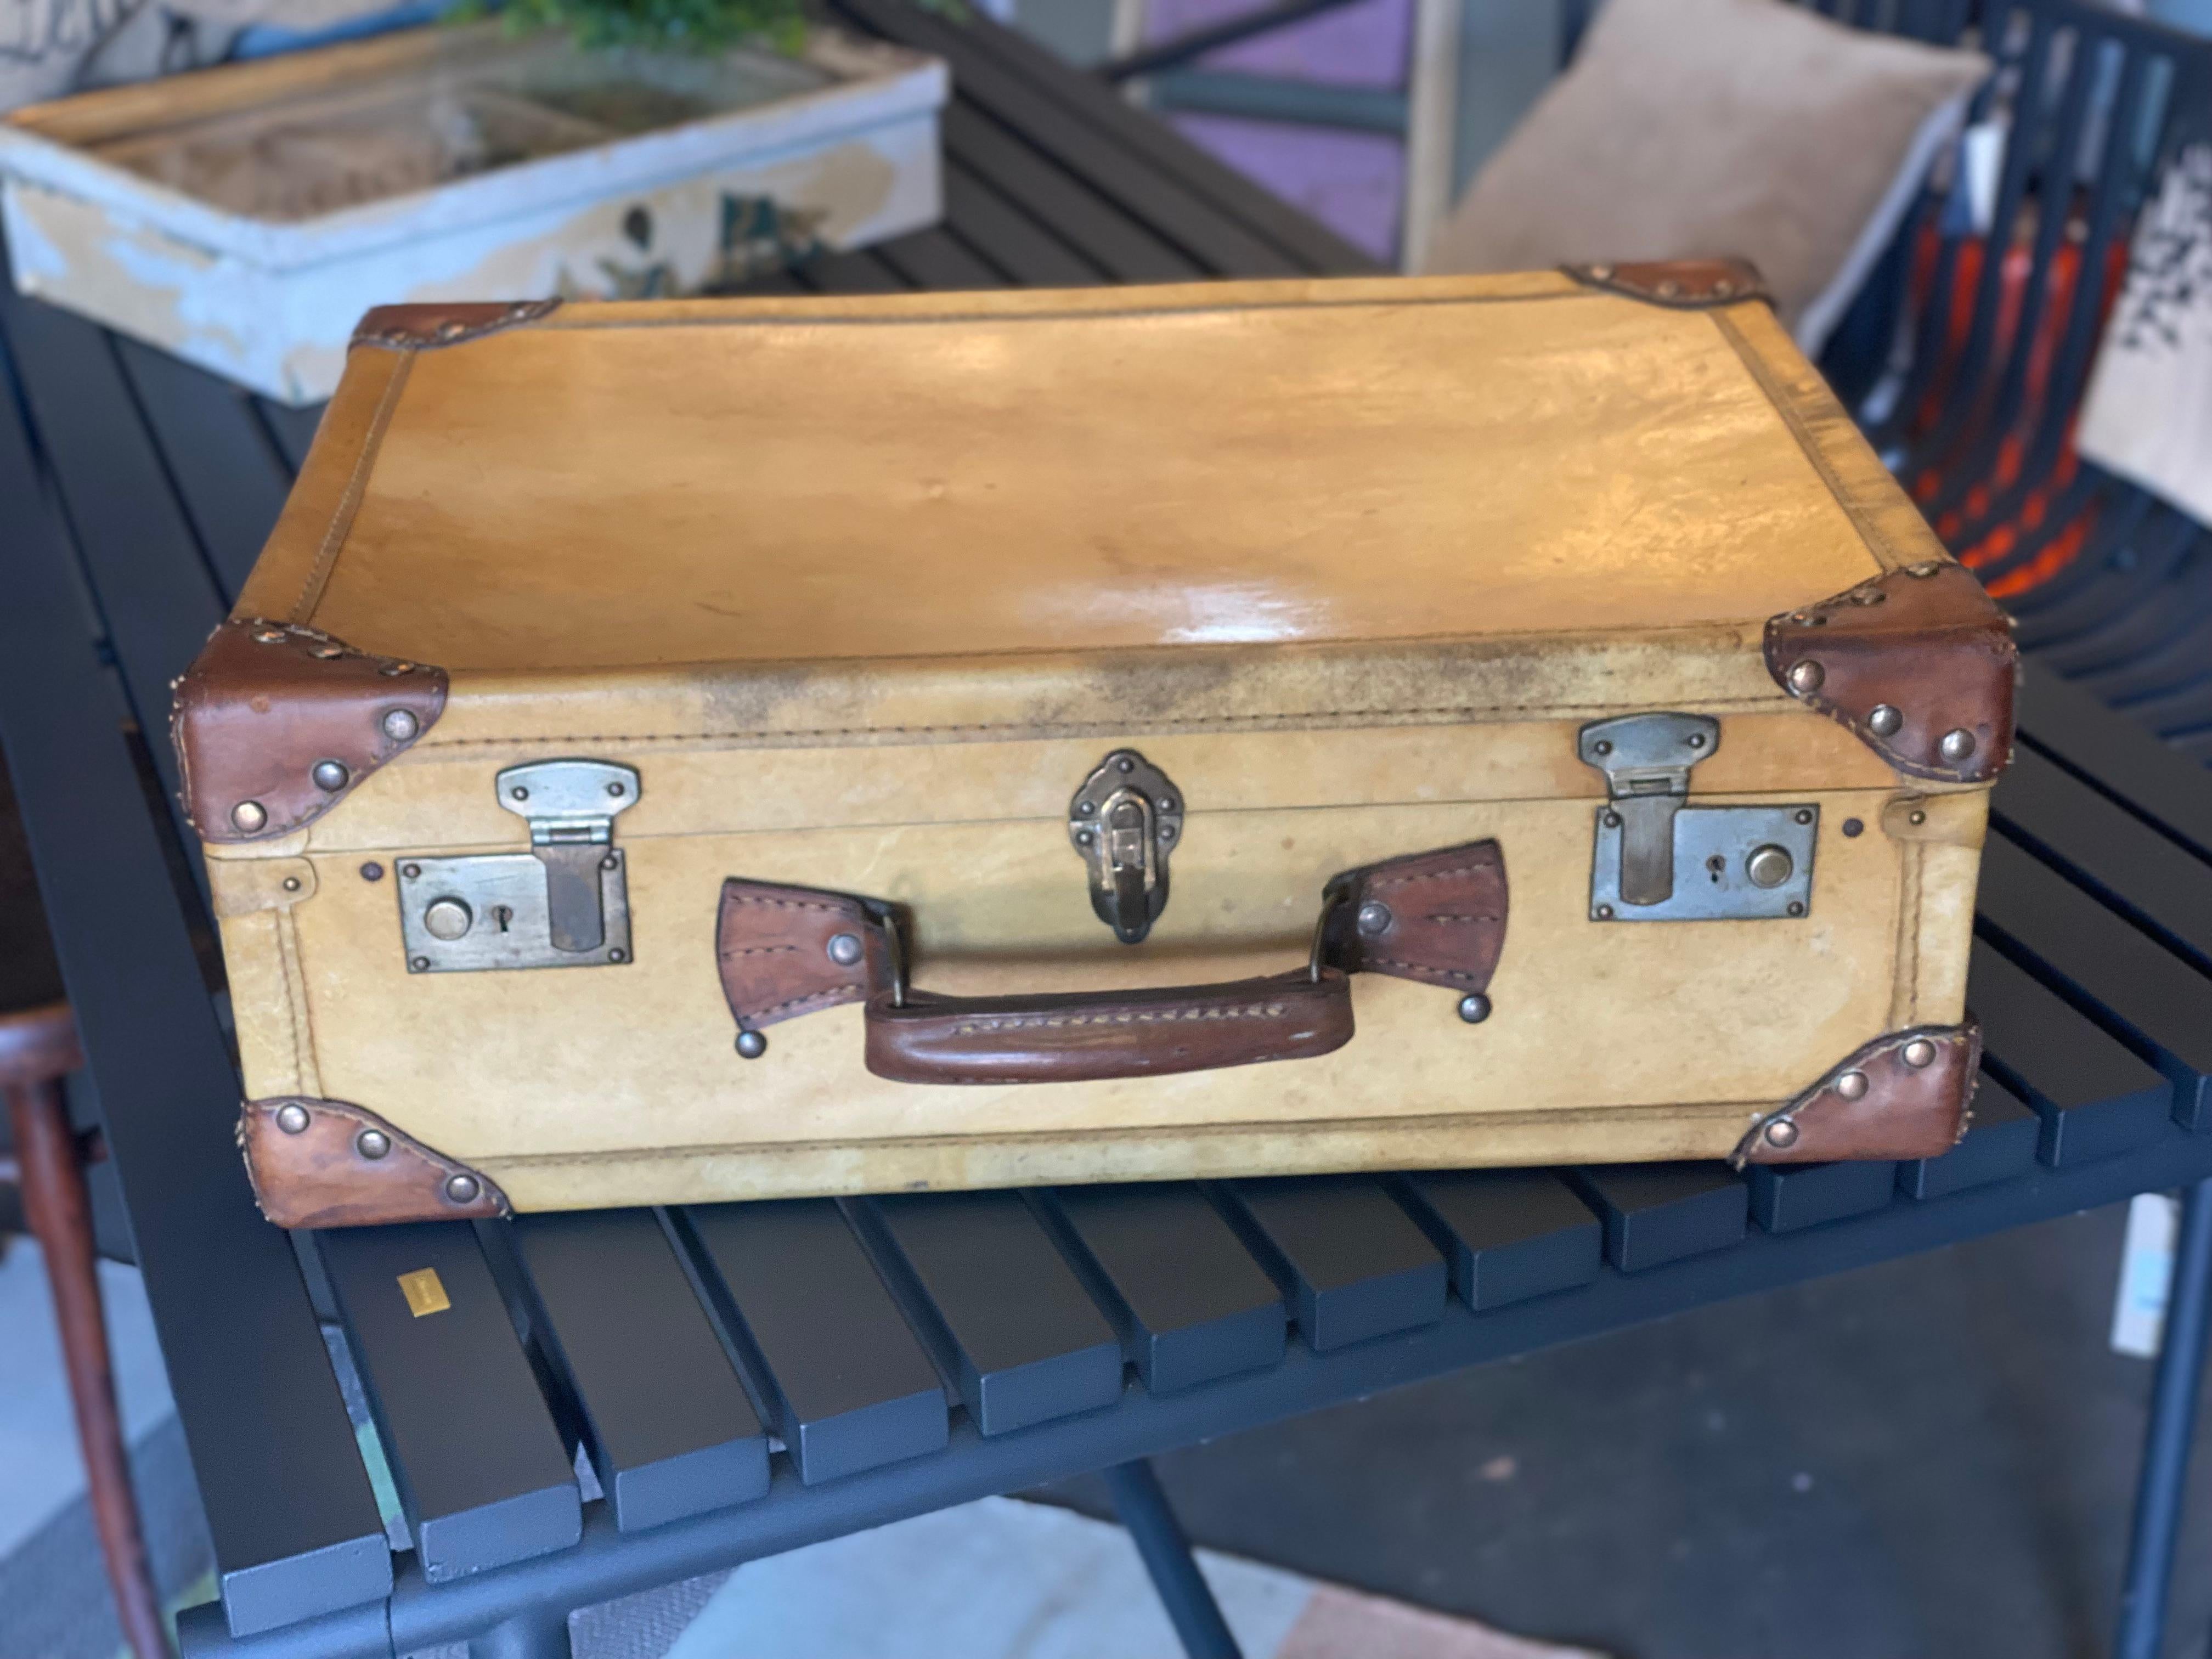 Luxurious Art Deco suitcase made of light parchment leather with rivets. Such pieces are rarely found, because the leather is of high quality and very popular. The colorful suitcases are typical of the Art Deco period, the golden 1920s. The case is